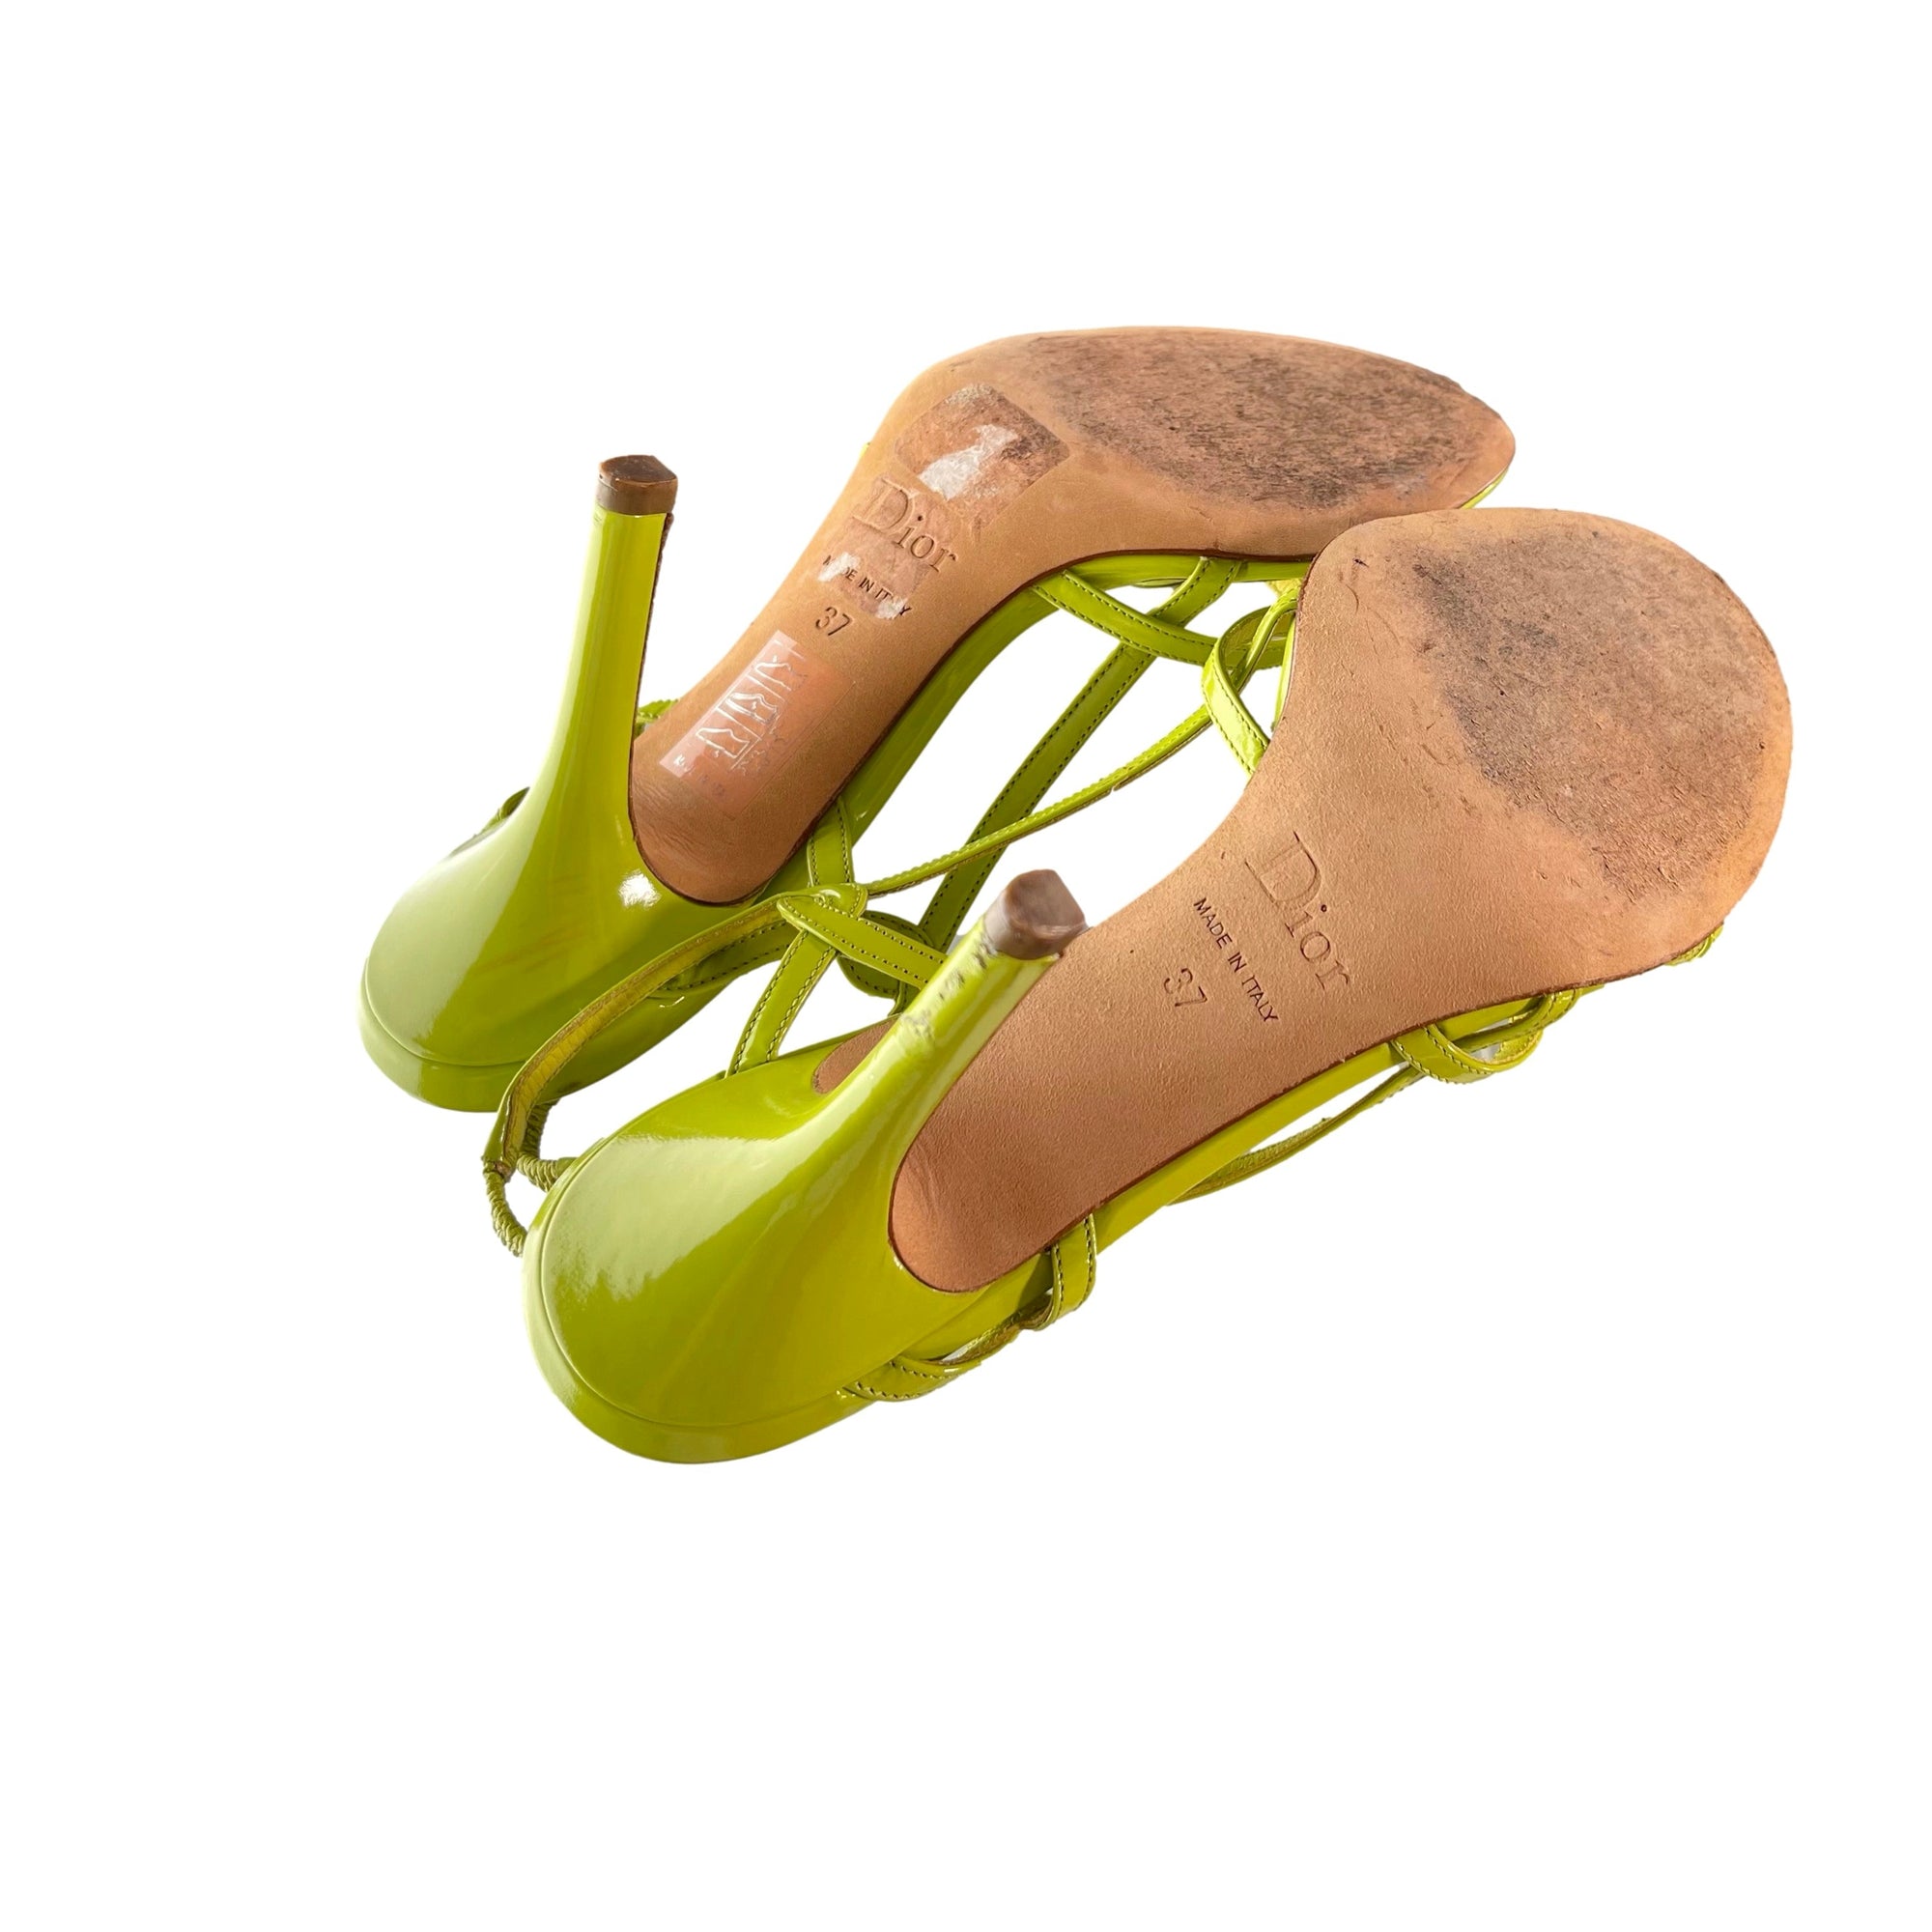 Dior Lime Green Logo Heels - Shoes